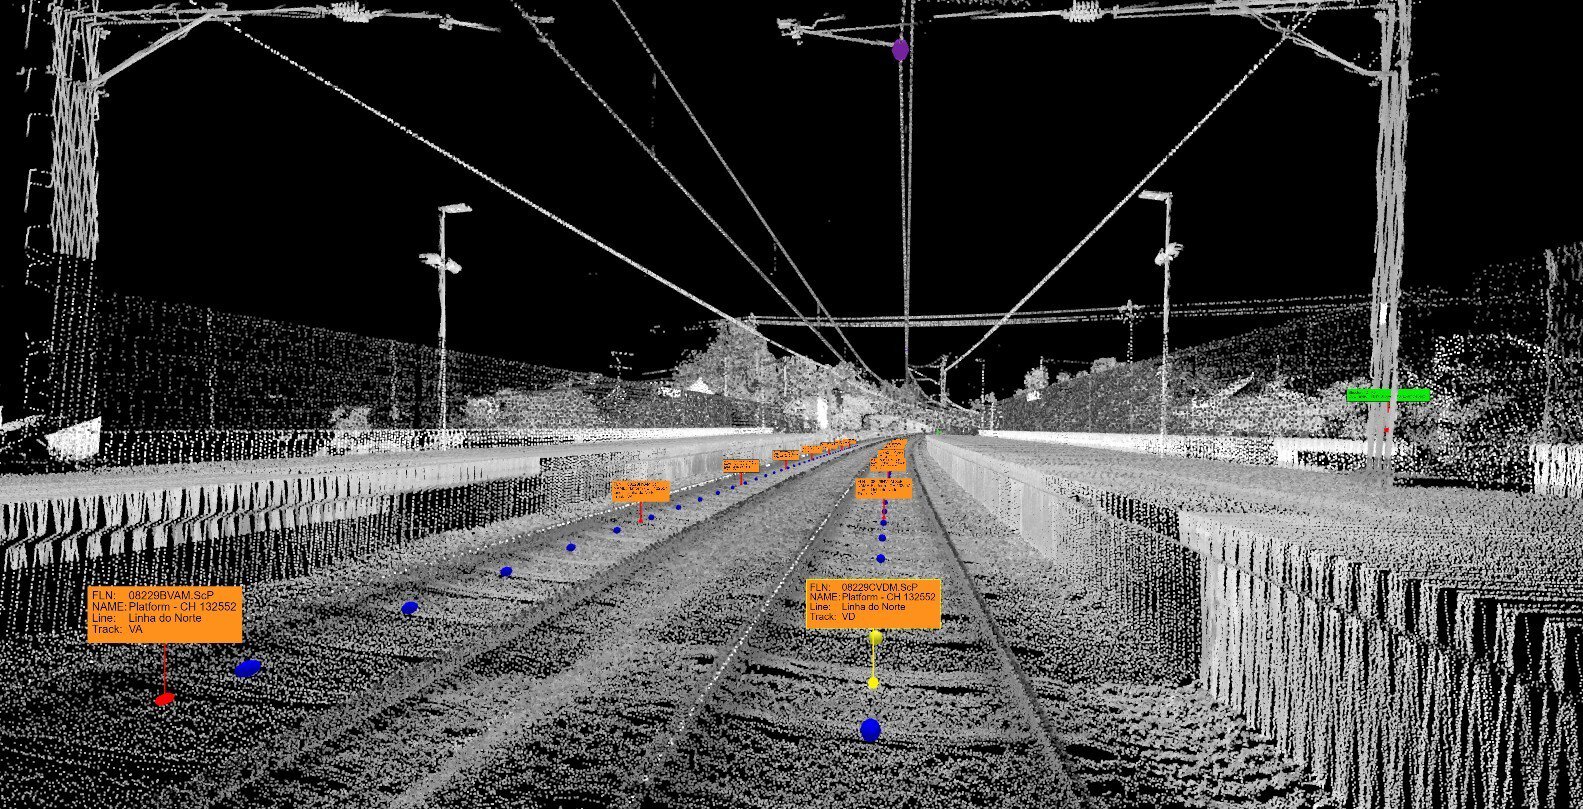 With a rail network of more than 2700 km to maintain, Infraestruturas de Portugal (IP) was keen to identify next generation technology to deliver safe, efficient, and accurate surveys of track geometry on its network. Our innovative RILA® technology met the technical requirements and offered IP the ability to collect additional types of engineering and safety related data in the future.